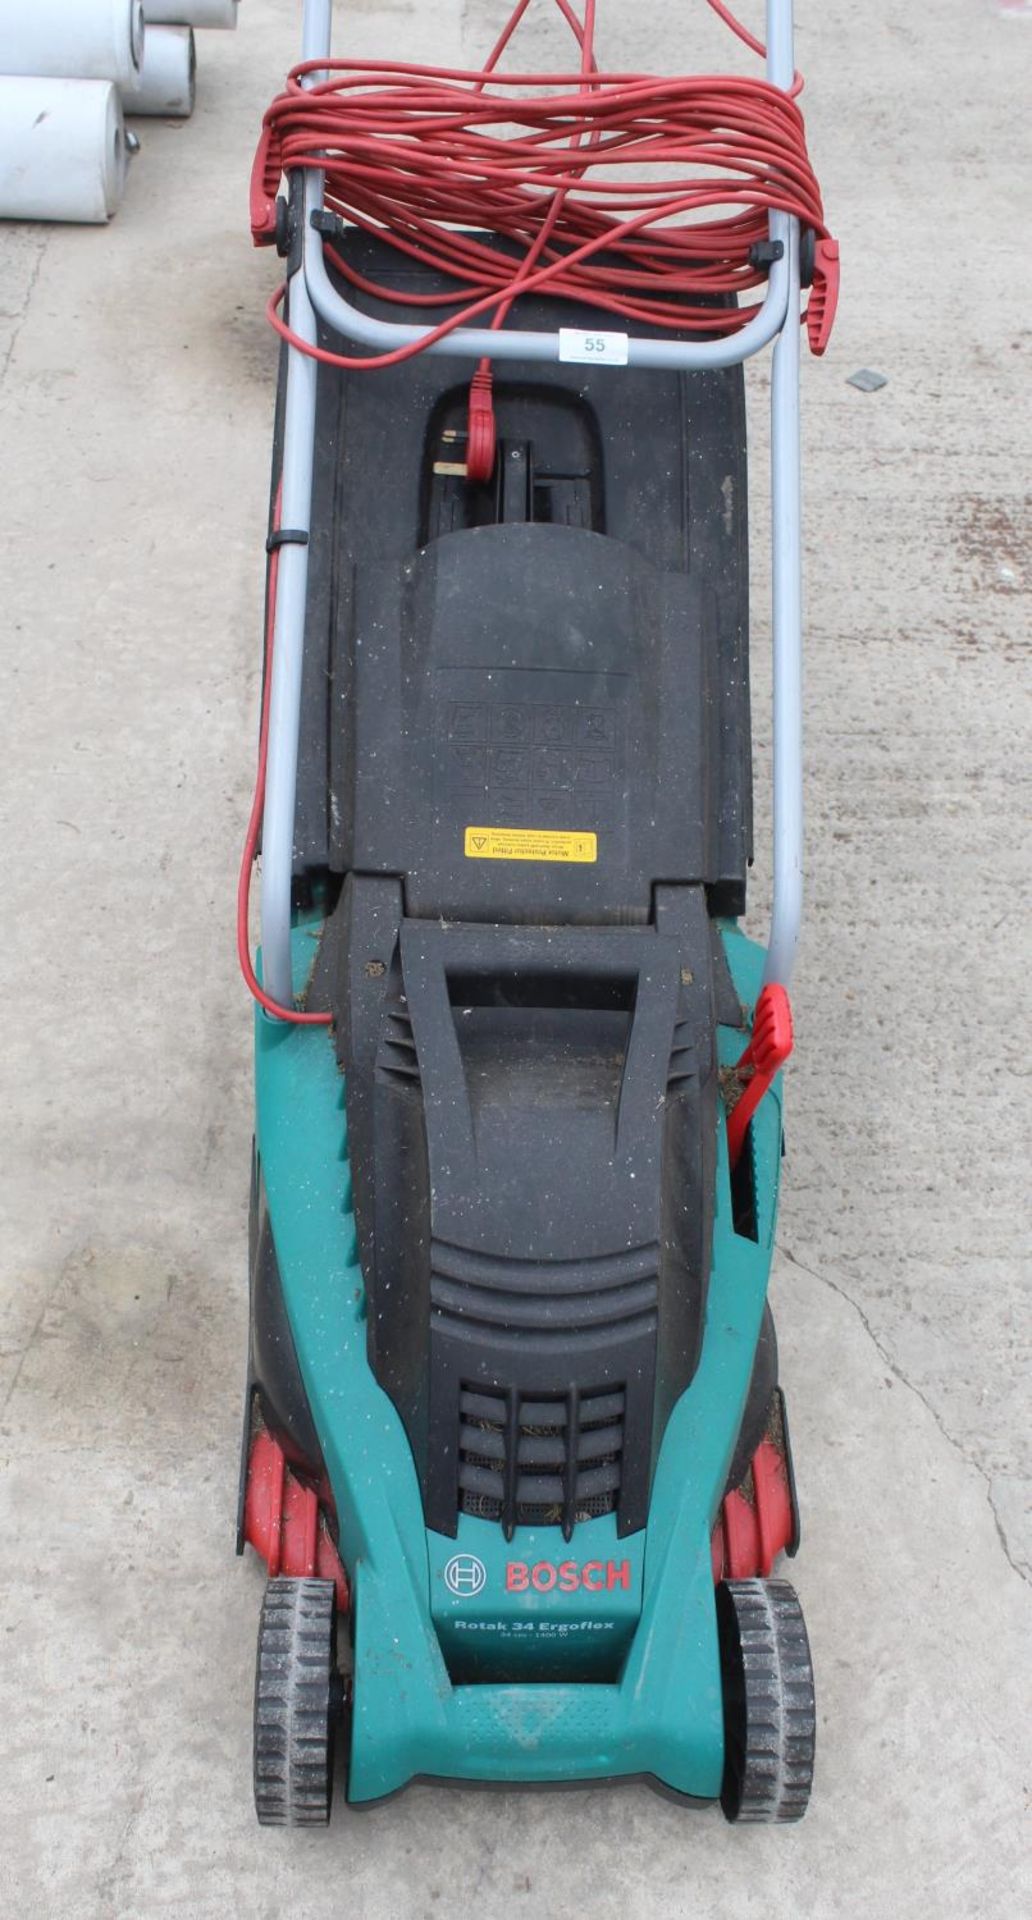 AN ELECTRIC BOSCH ROTARY 34 LAWNMOWER WITH GRASS BOX BELIEVED IN WORKING ORDER BUT NO WARRANTY GIVEN - Image 2 of 2